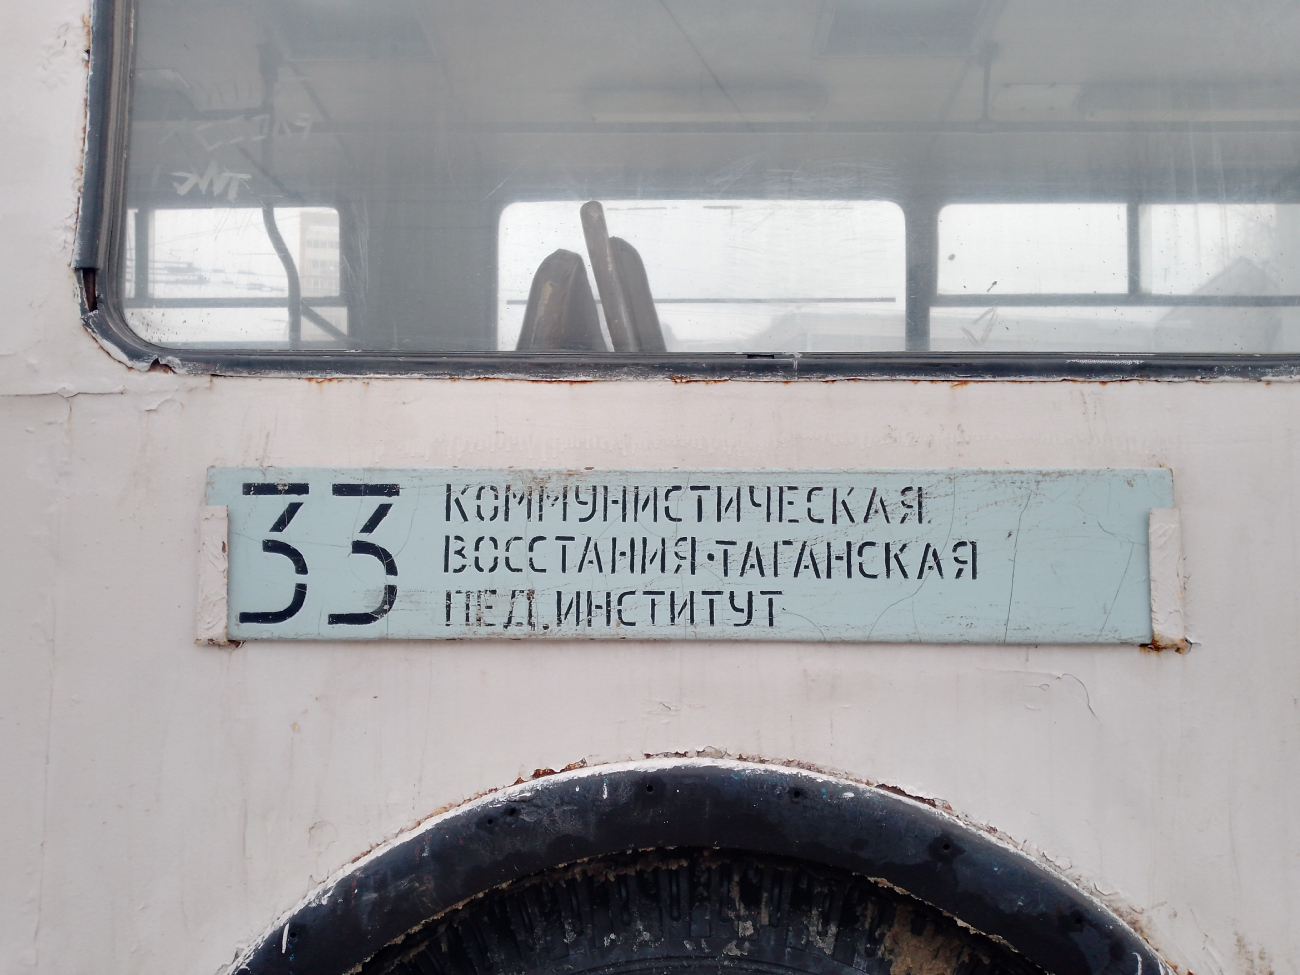 Yekaterinburg — Stopping and routing cliches